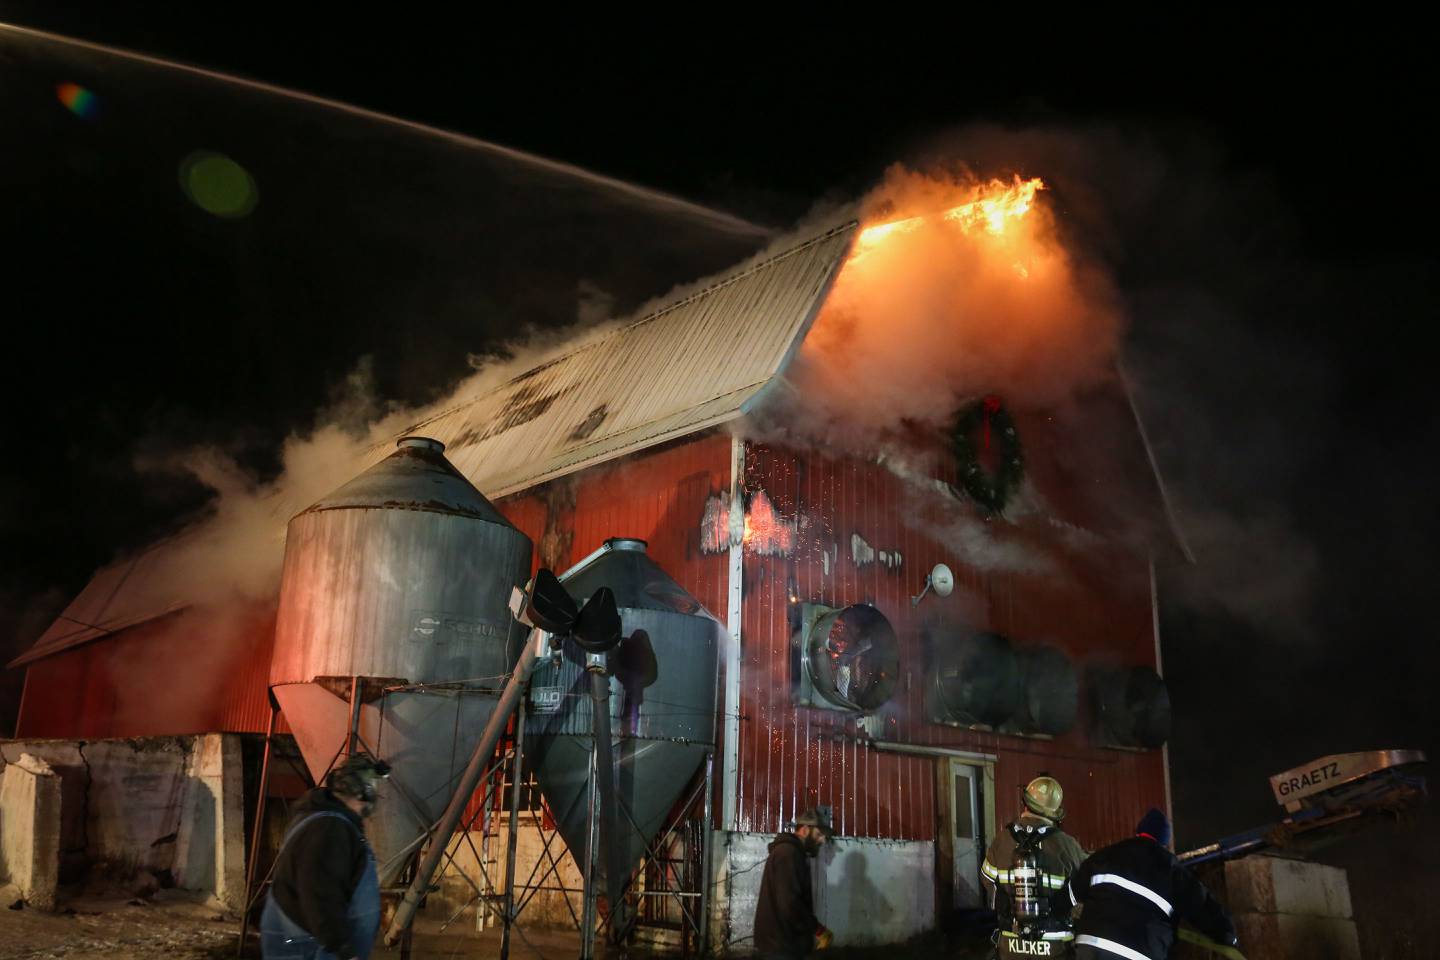 McHenry Township Fire Protection District responded about 9 p.m. Tuesday, Jan. 11, 2022, to a fire in the 6000 block of Barnard Mill Road in Ringwood.